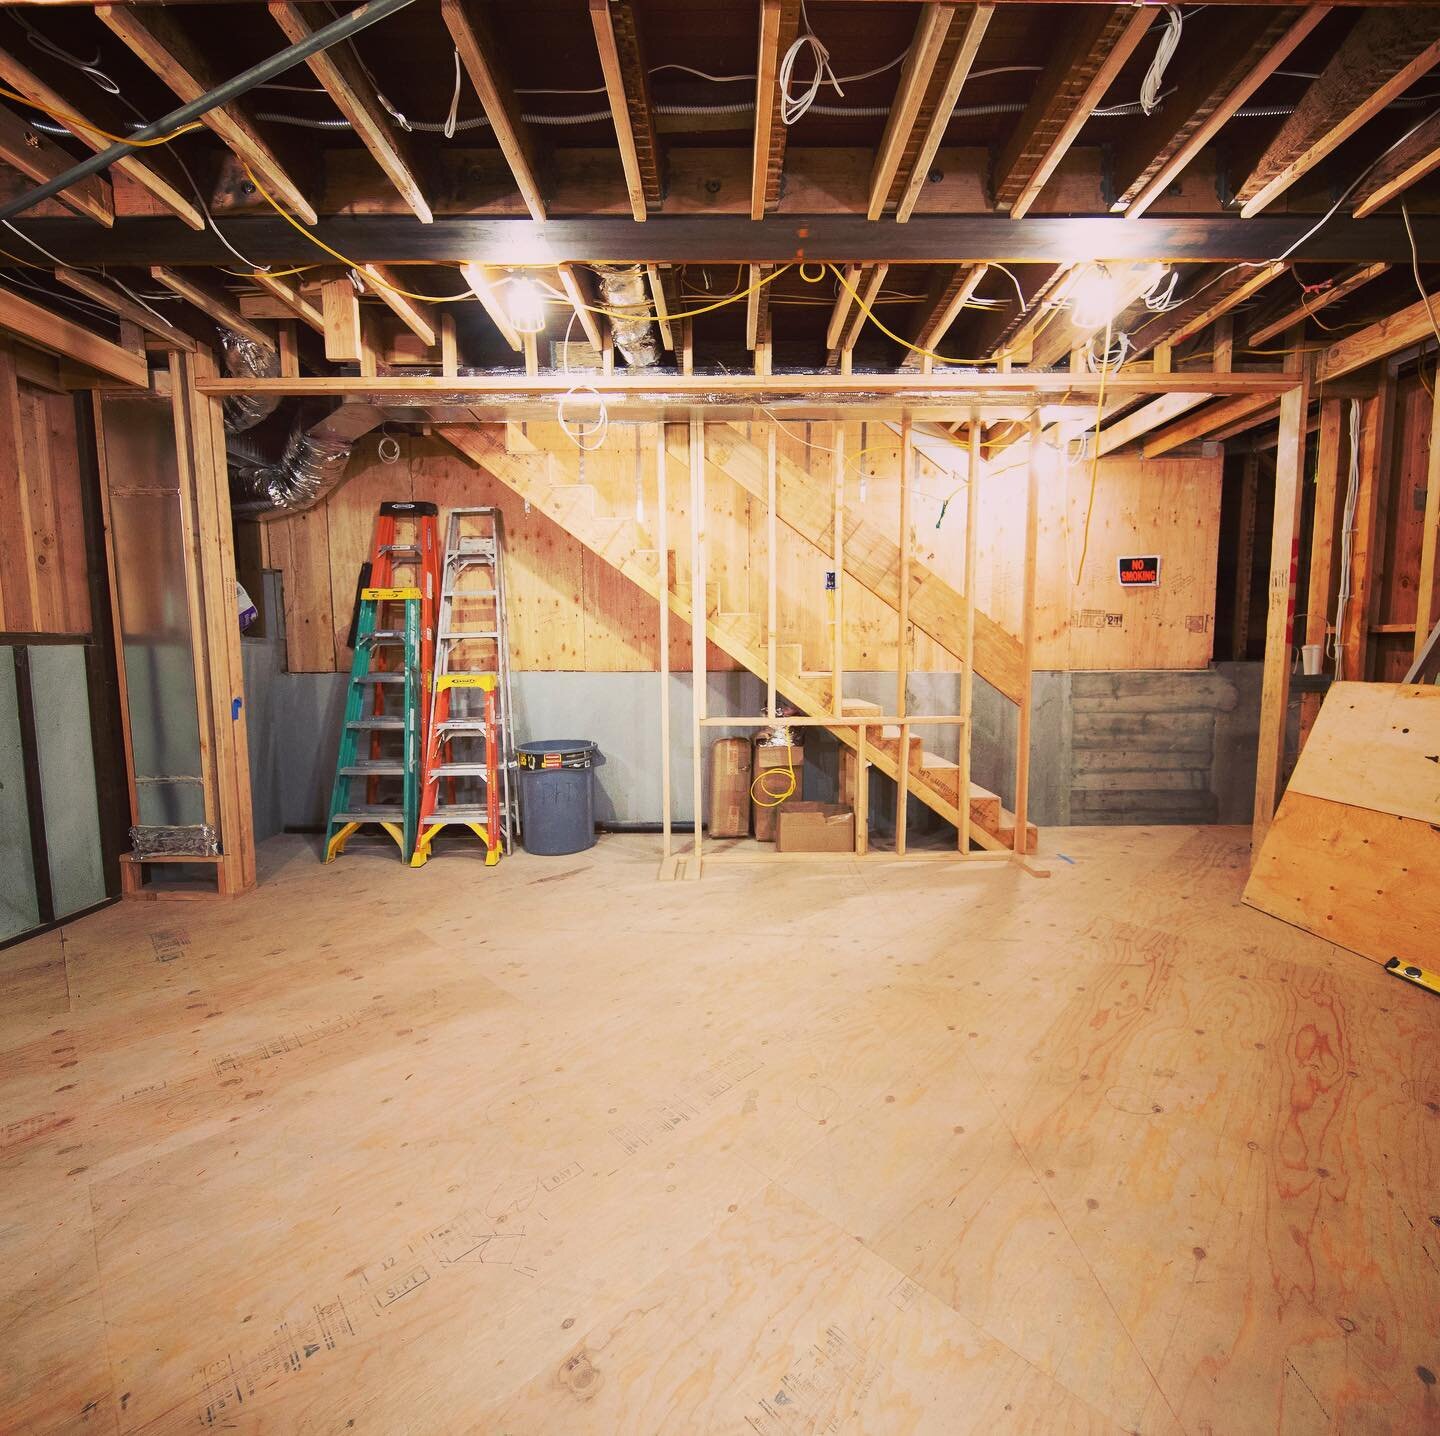 PAC Heights basement remodel nearly ready for drywall.

#concreteconstruction #timberframing 
#structuralengineering 
#steelbeams